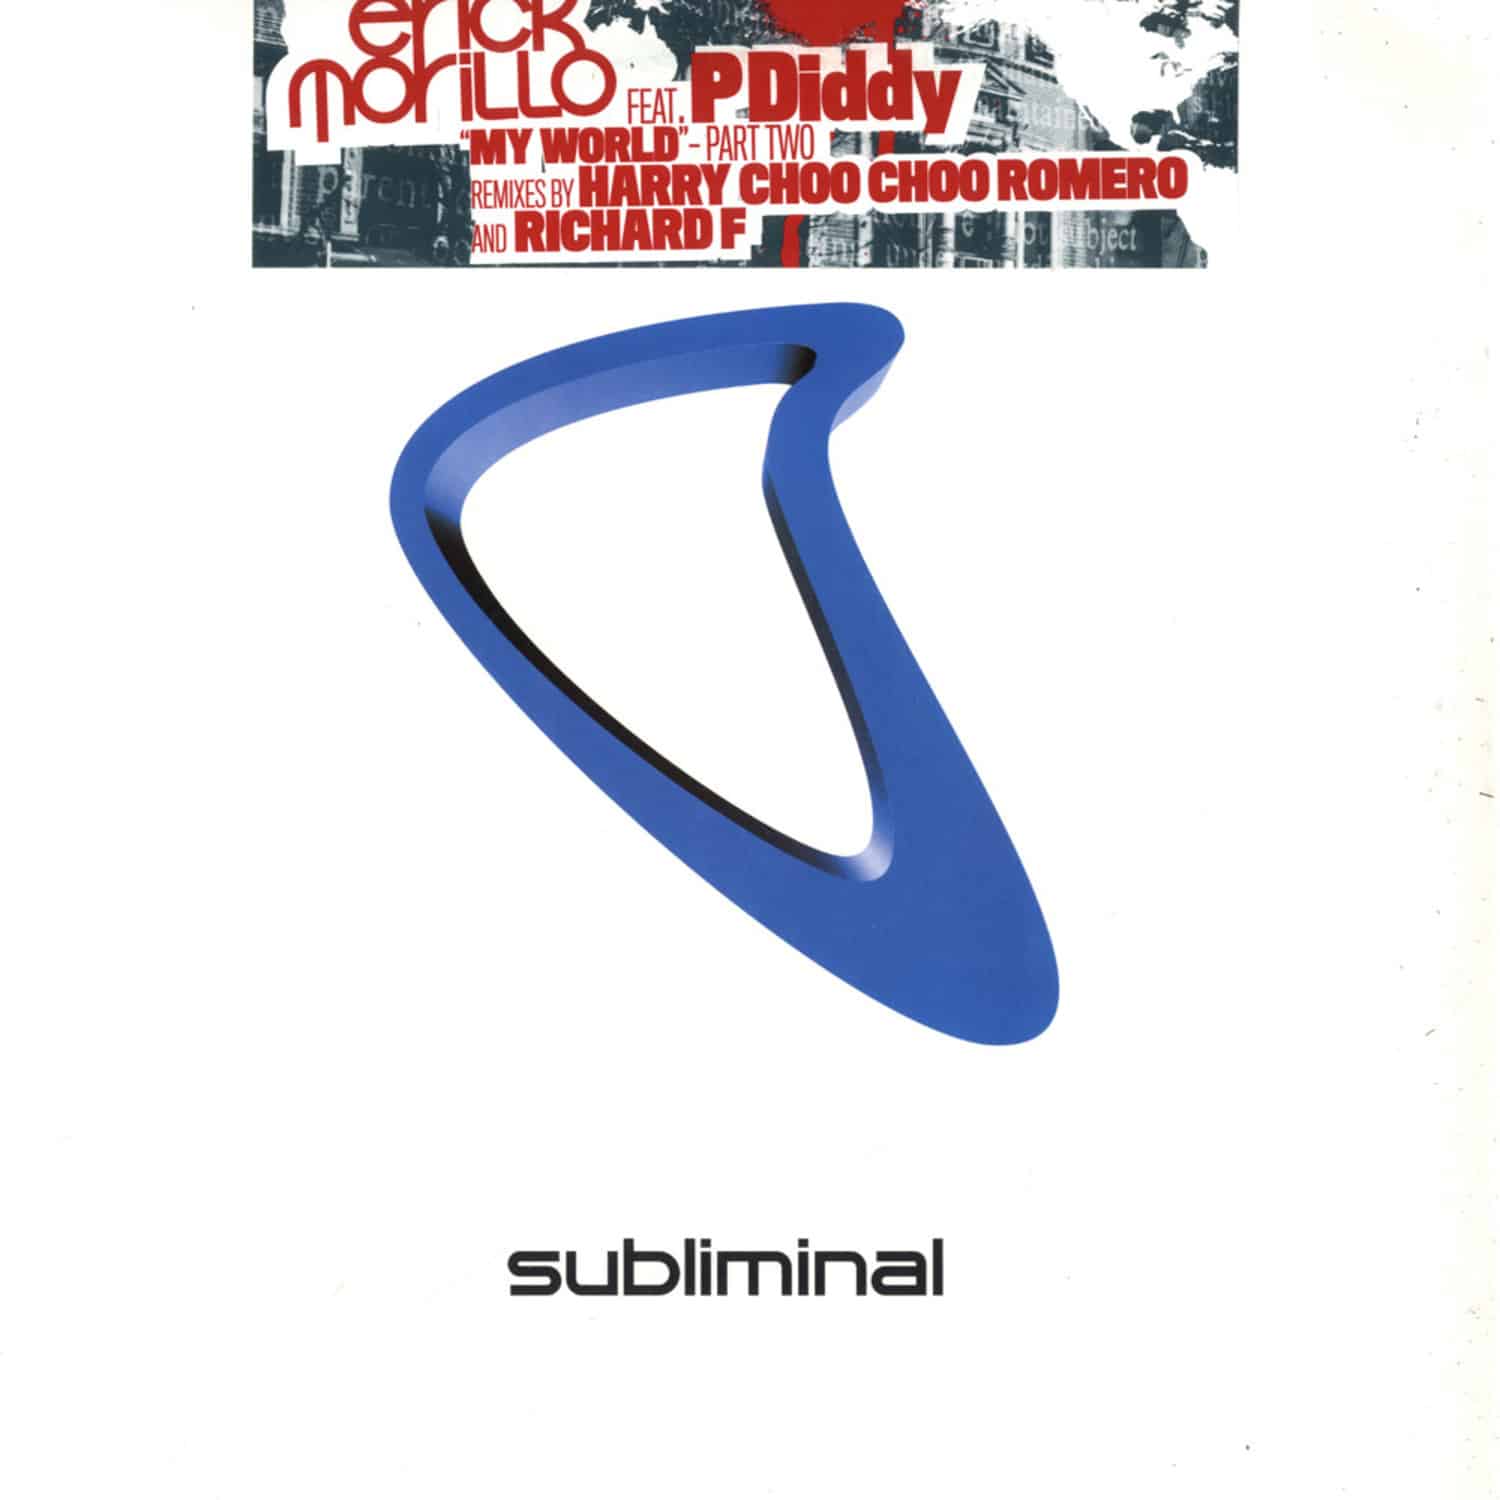 Erick Morillo feat. P.Diddy - MY WORLD PART 2